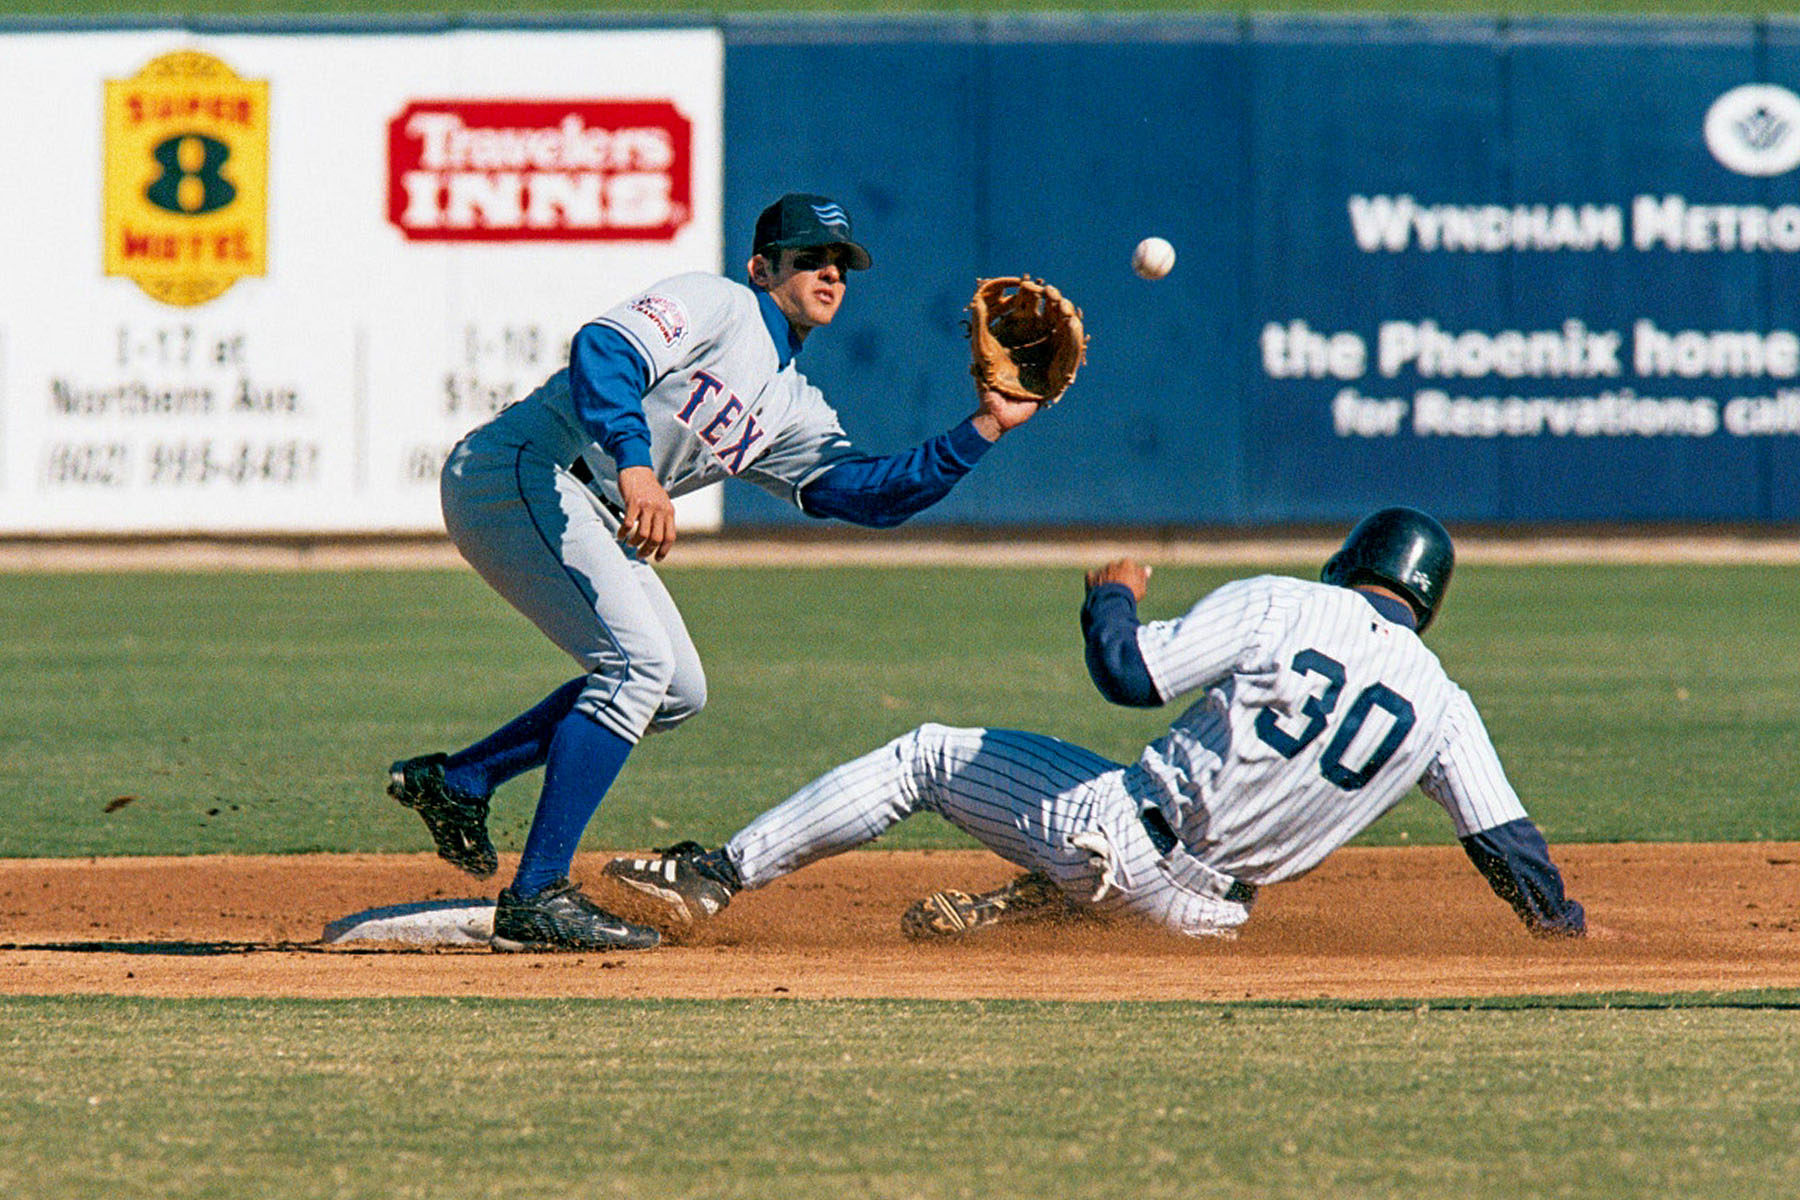 Phoenix Larry Barnes (Angels) slides in as Grand Canyon shortstop Mike Young (Rangers) defends, Arizona Fall League, 2000.  Click for next photo.